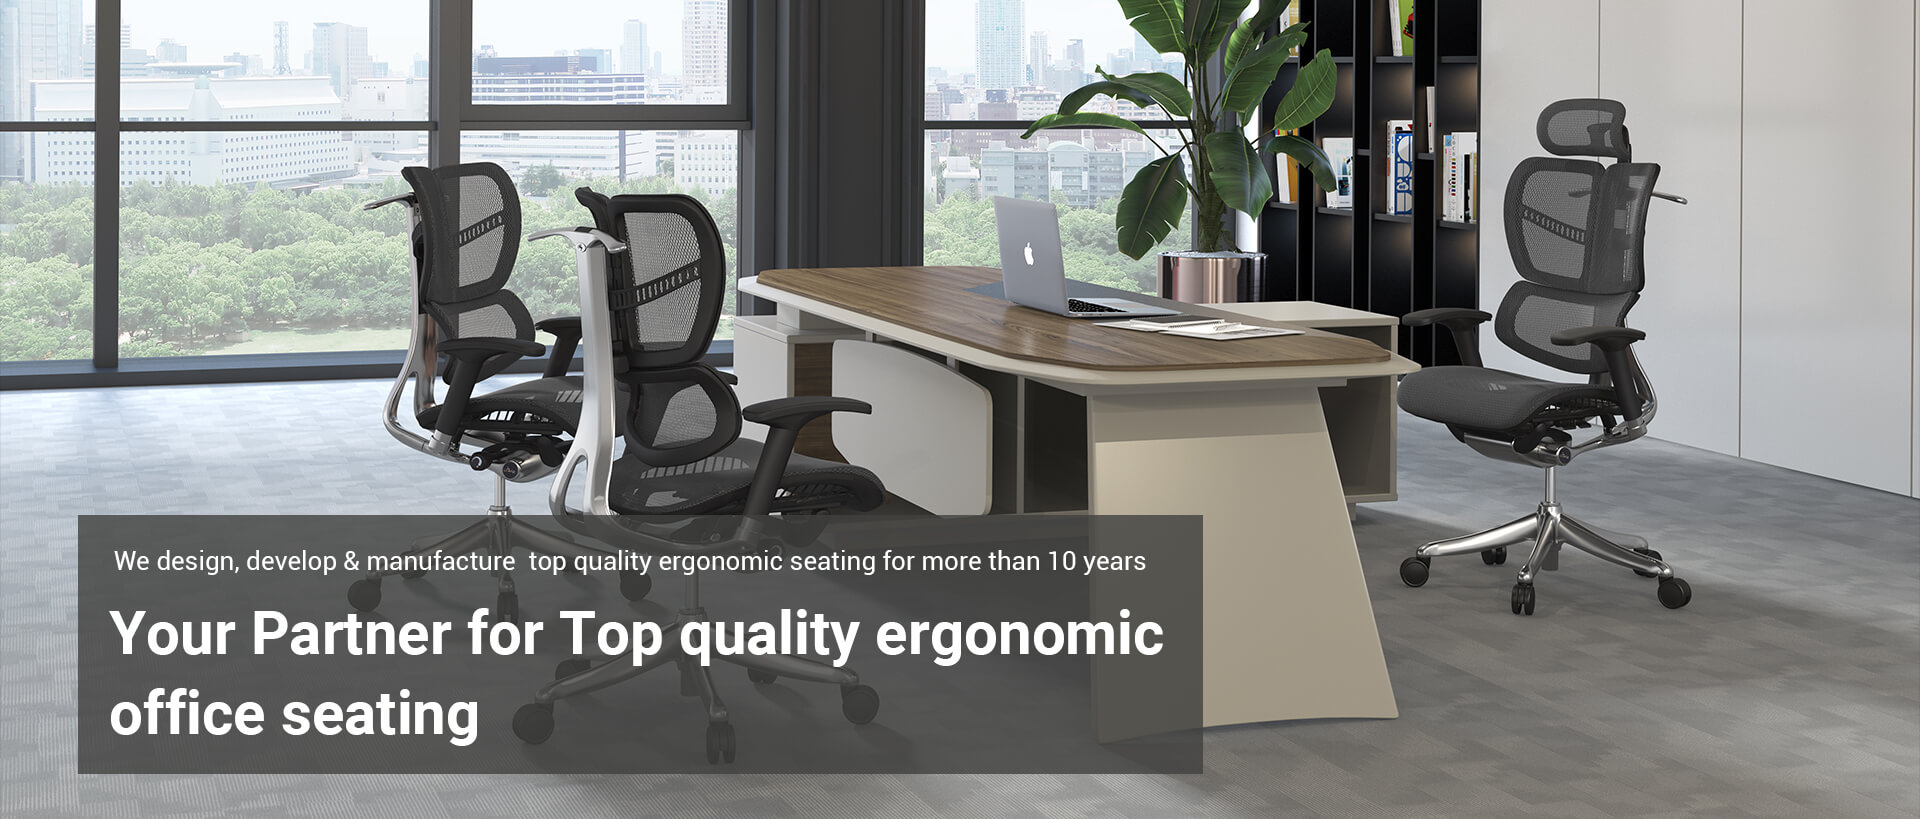 Top quality ergonomic office seating